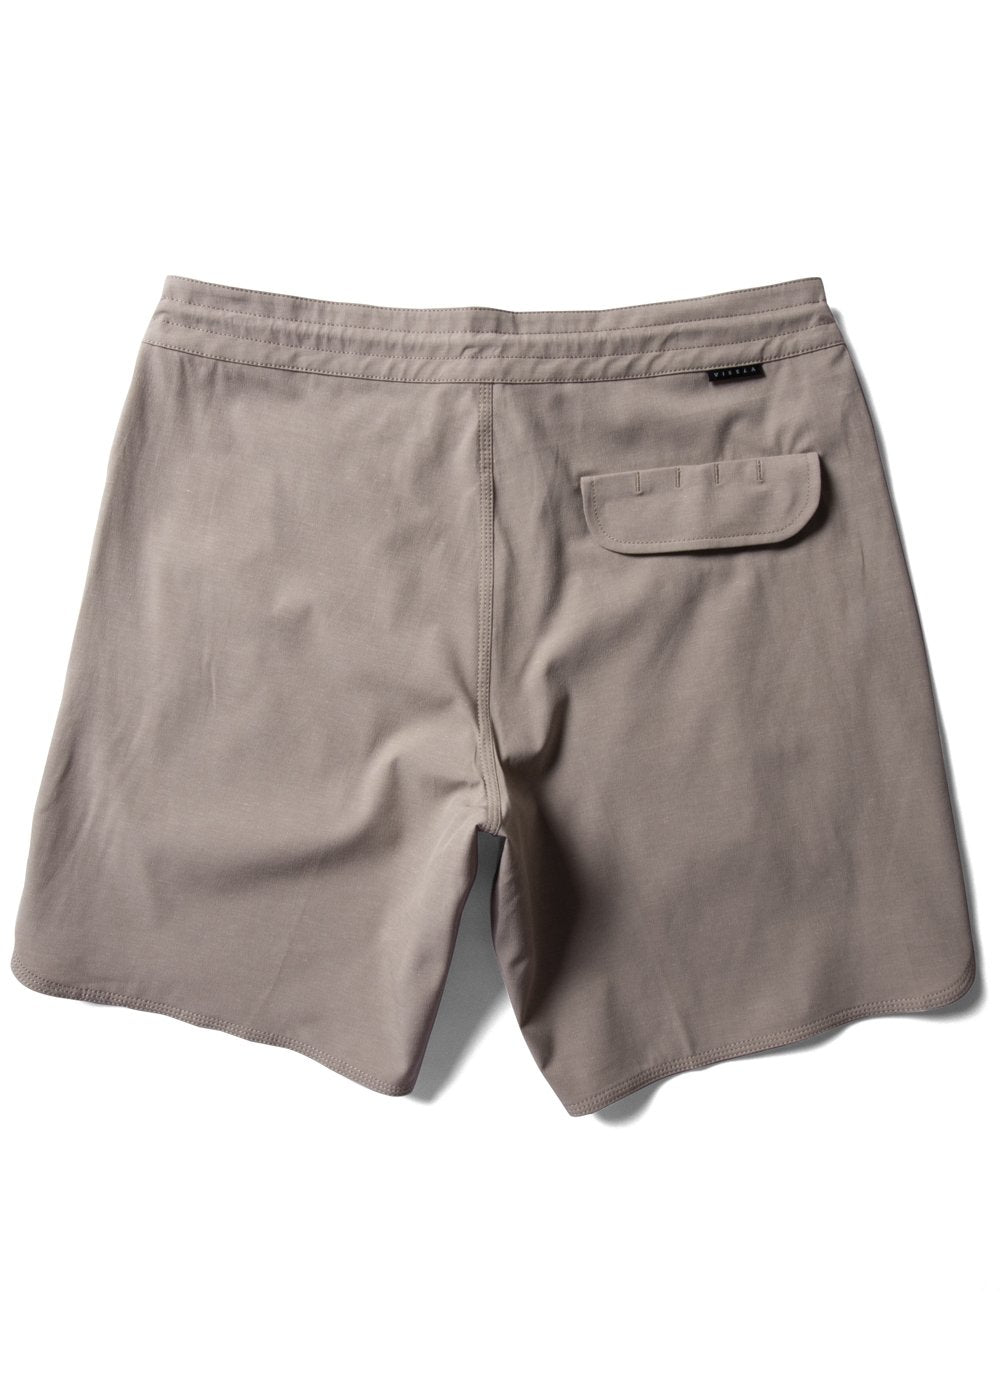 Cattle and Brands Swim Trunks – Simply Avilee